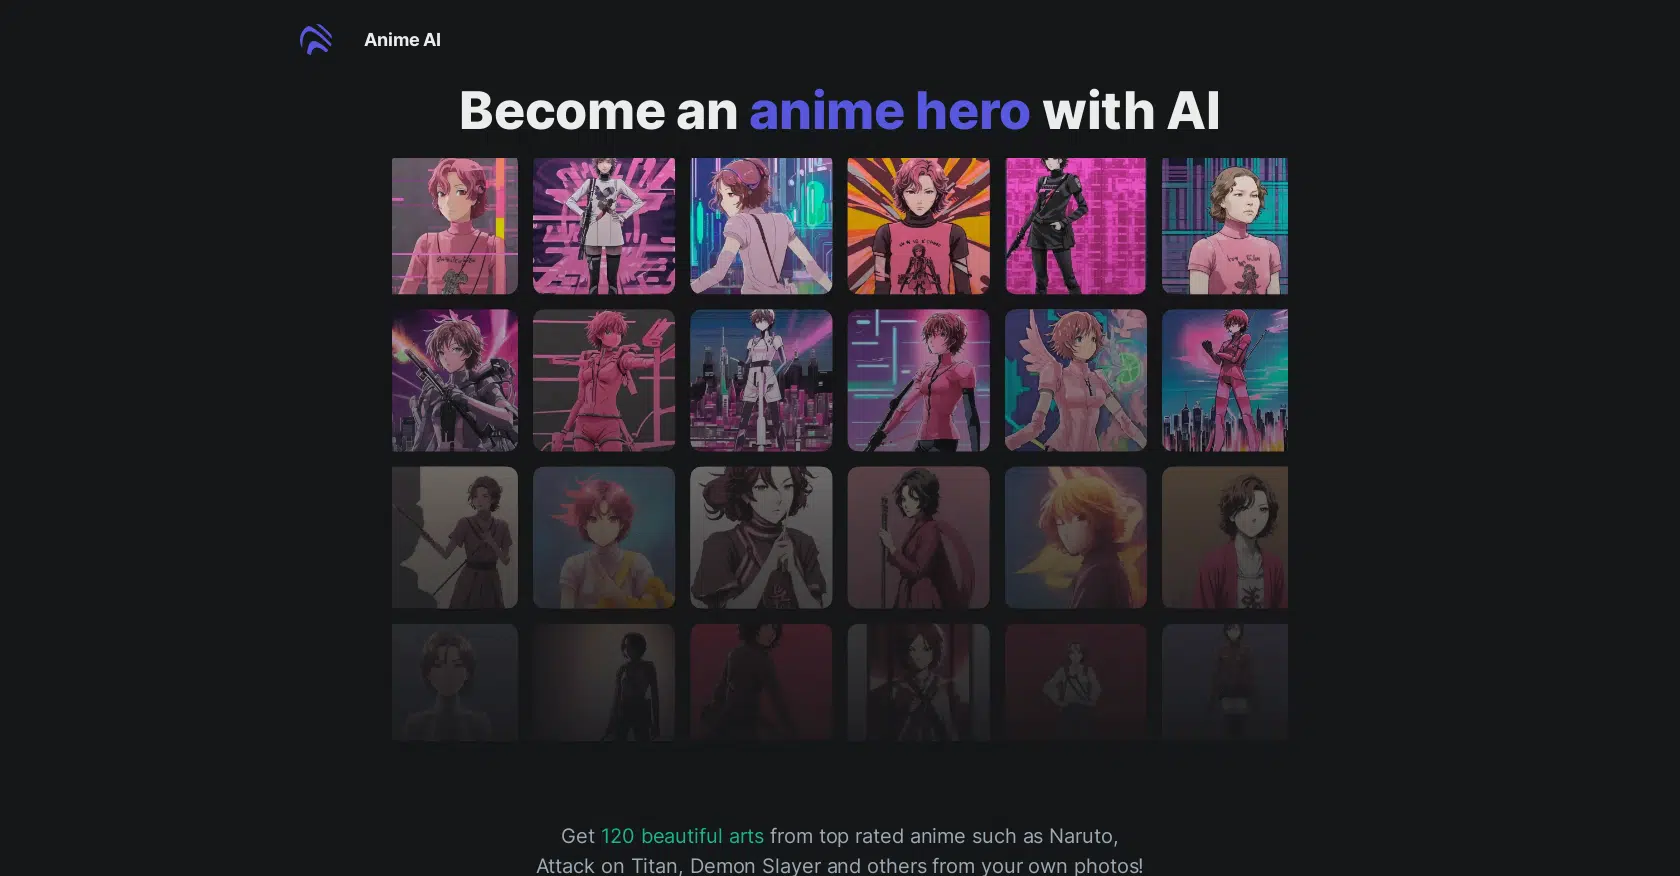 AnimeAIwebsite picture